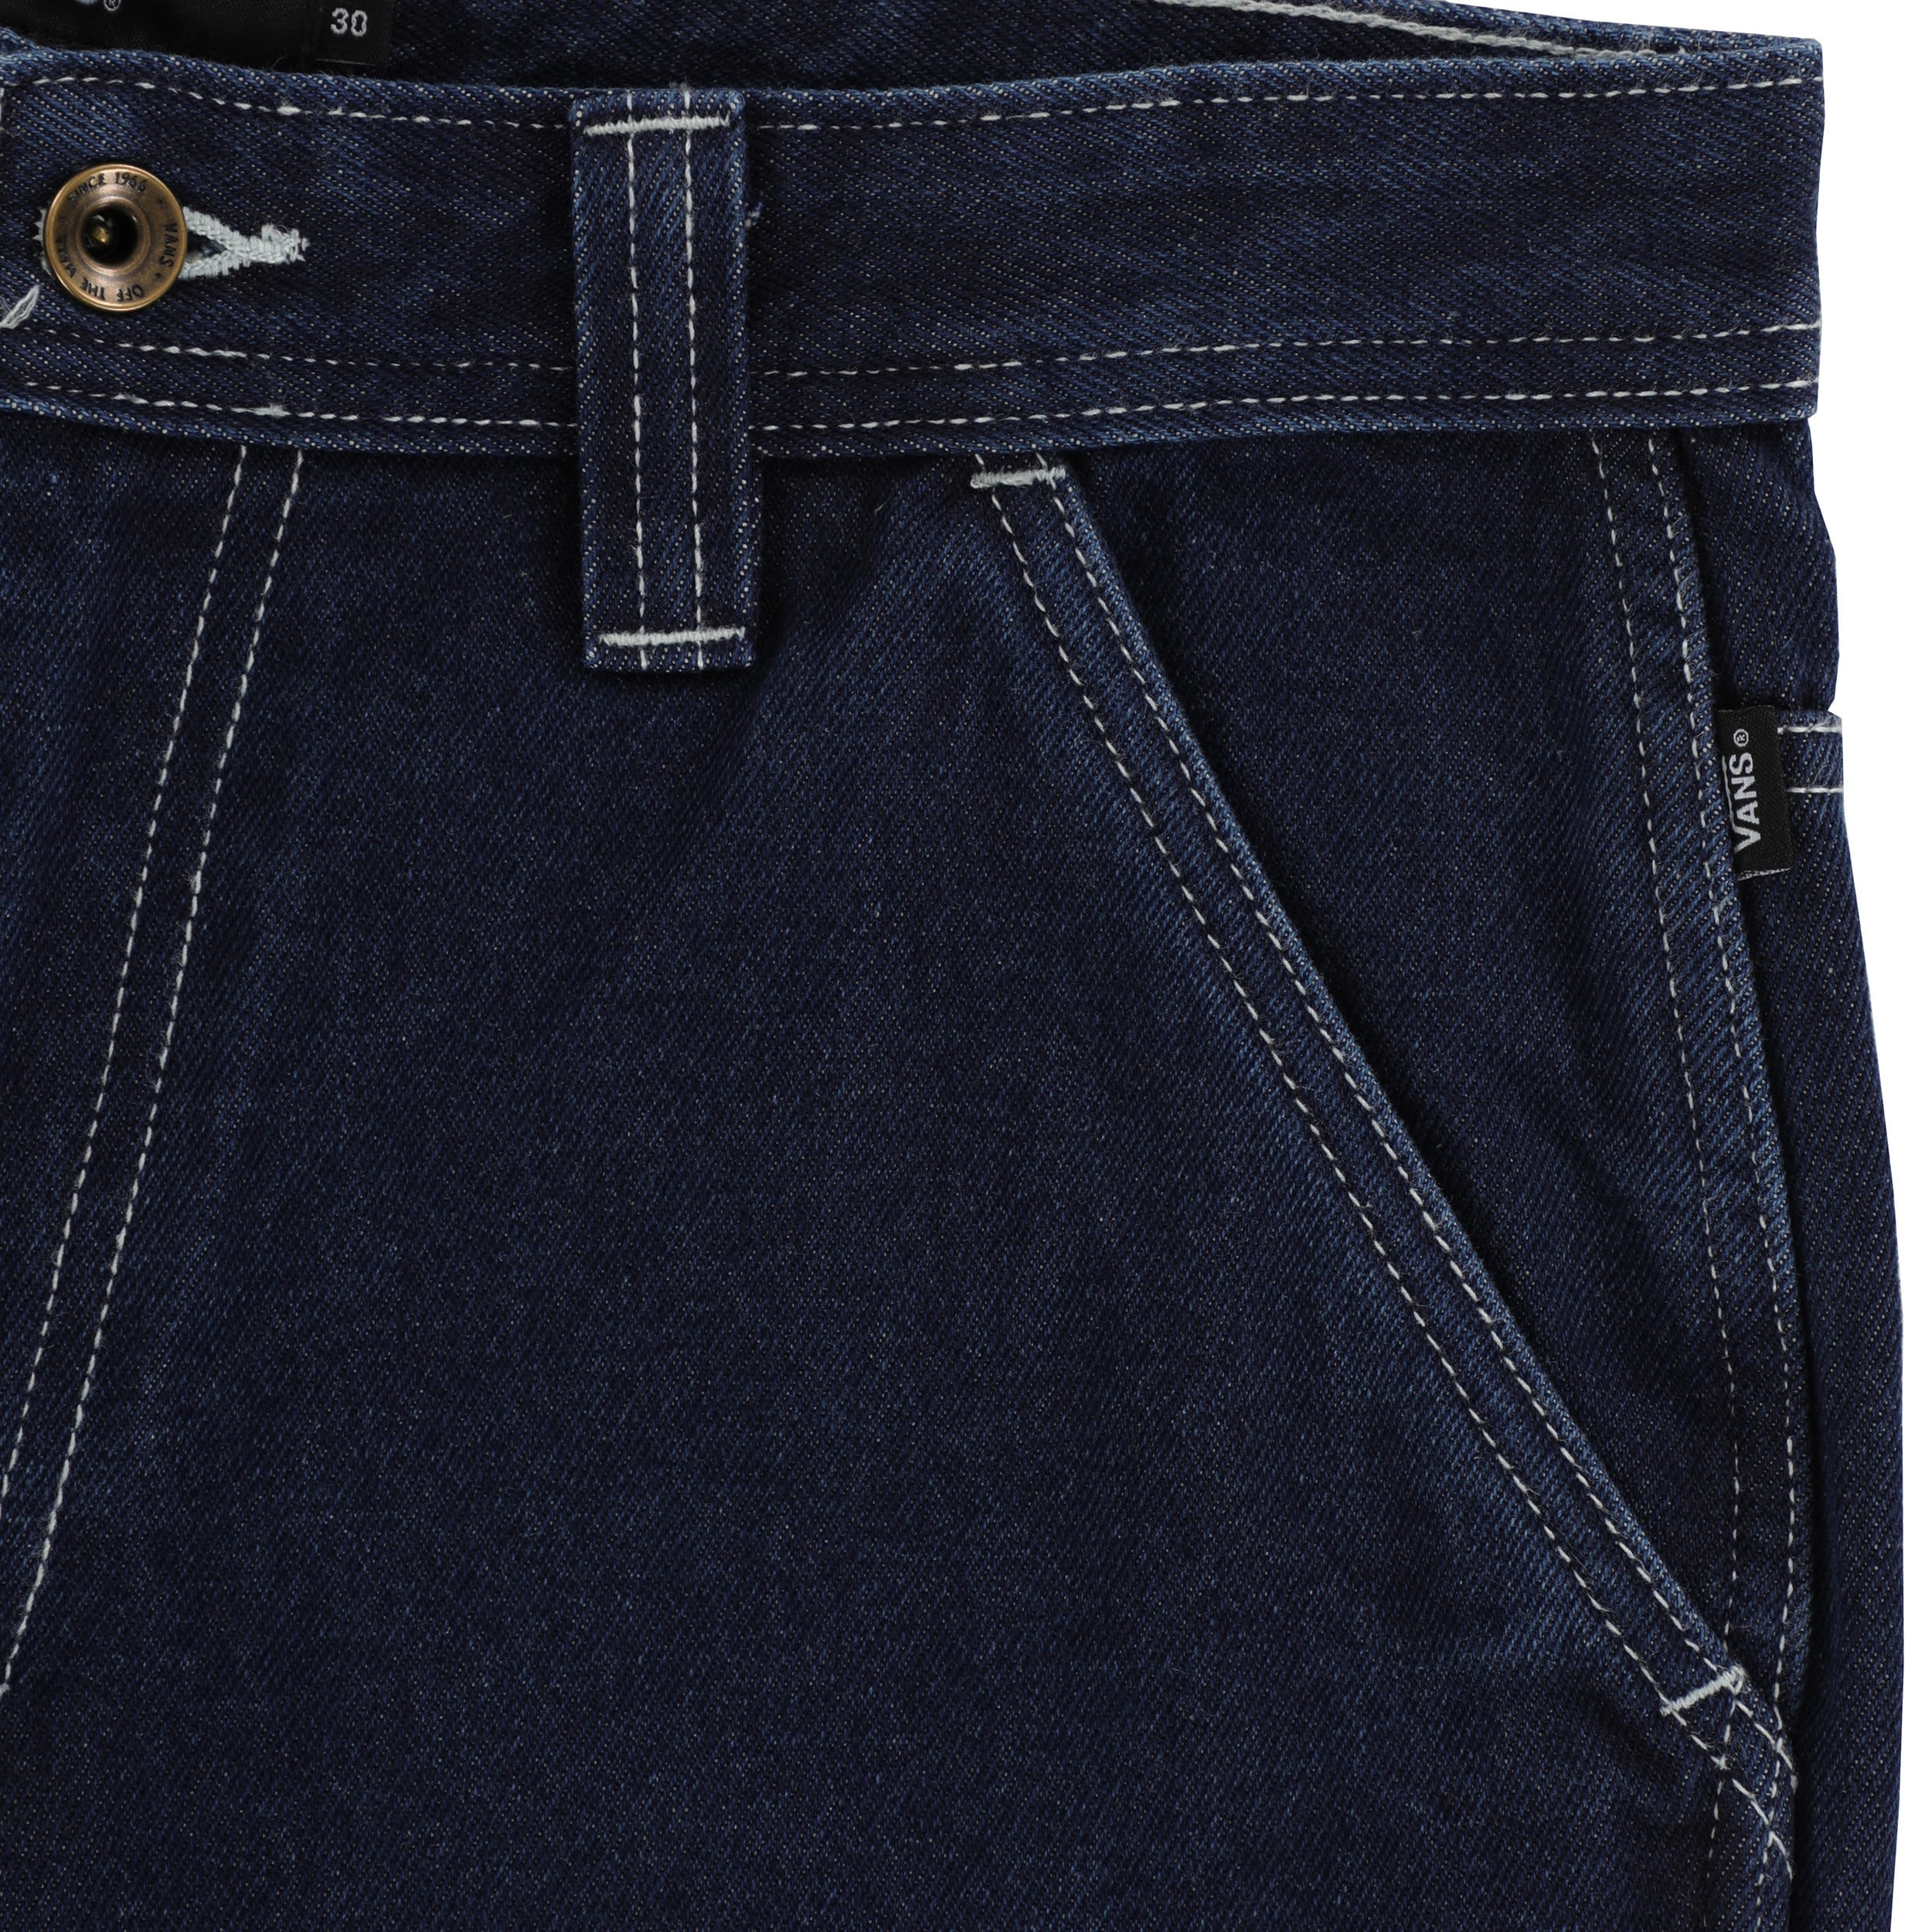 Vans Drill Chore Loose Tapered Jeans - midnight rinse | Tactics